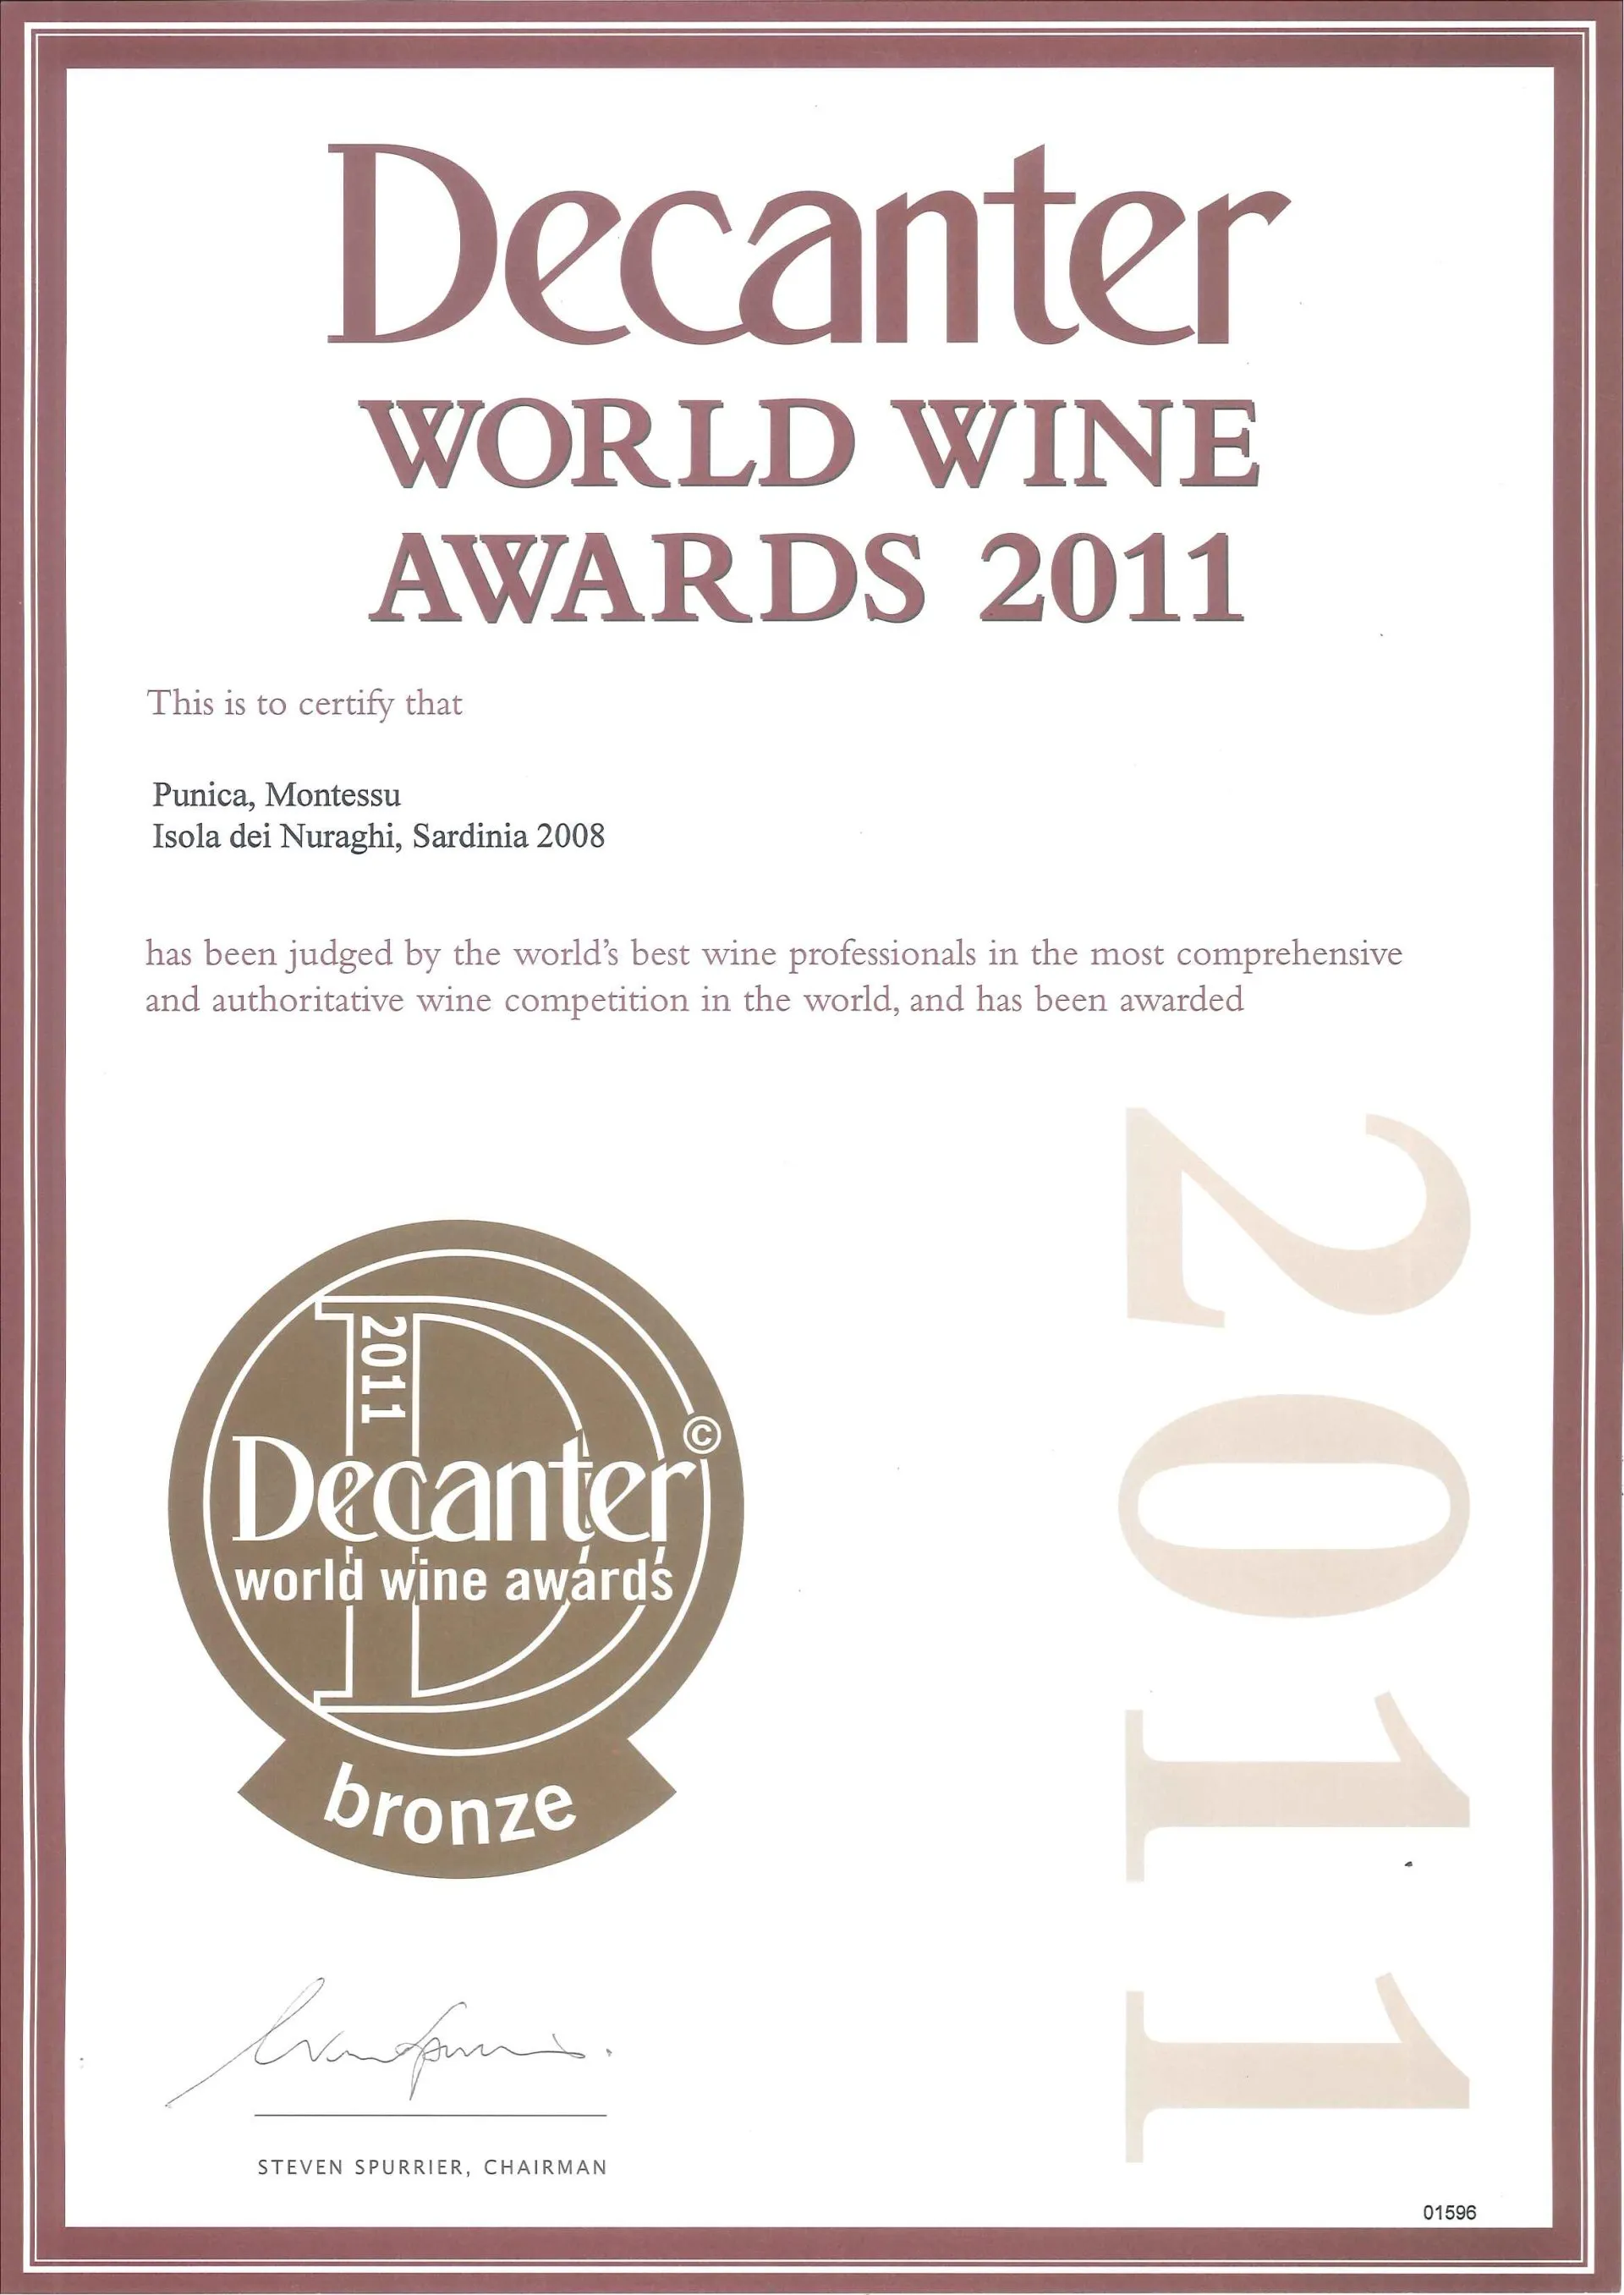 Decanter world wide awards 2011